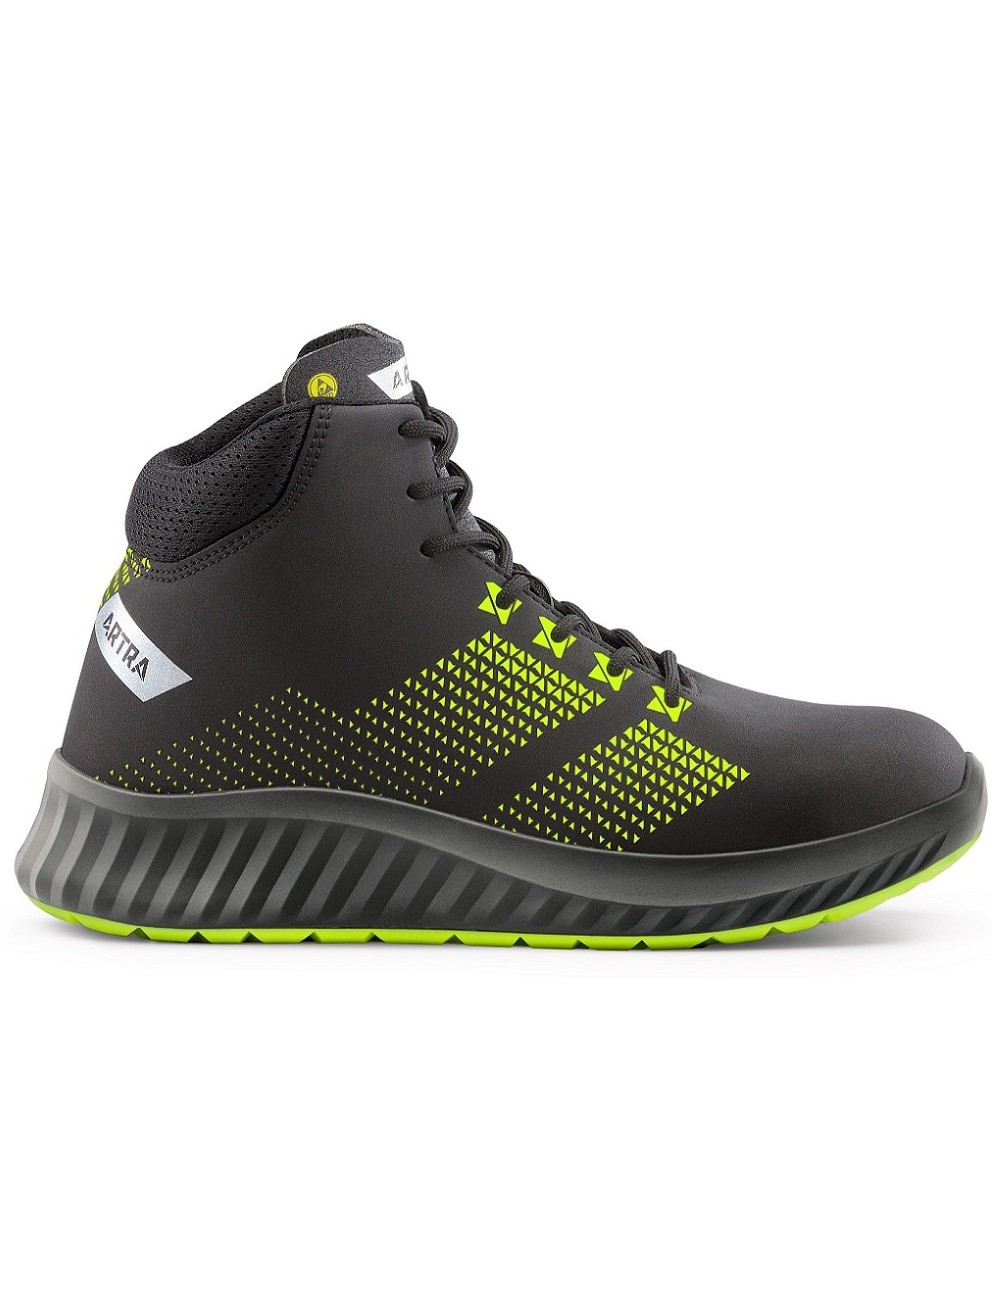 Artra Aroserio S3 safety boots